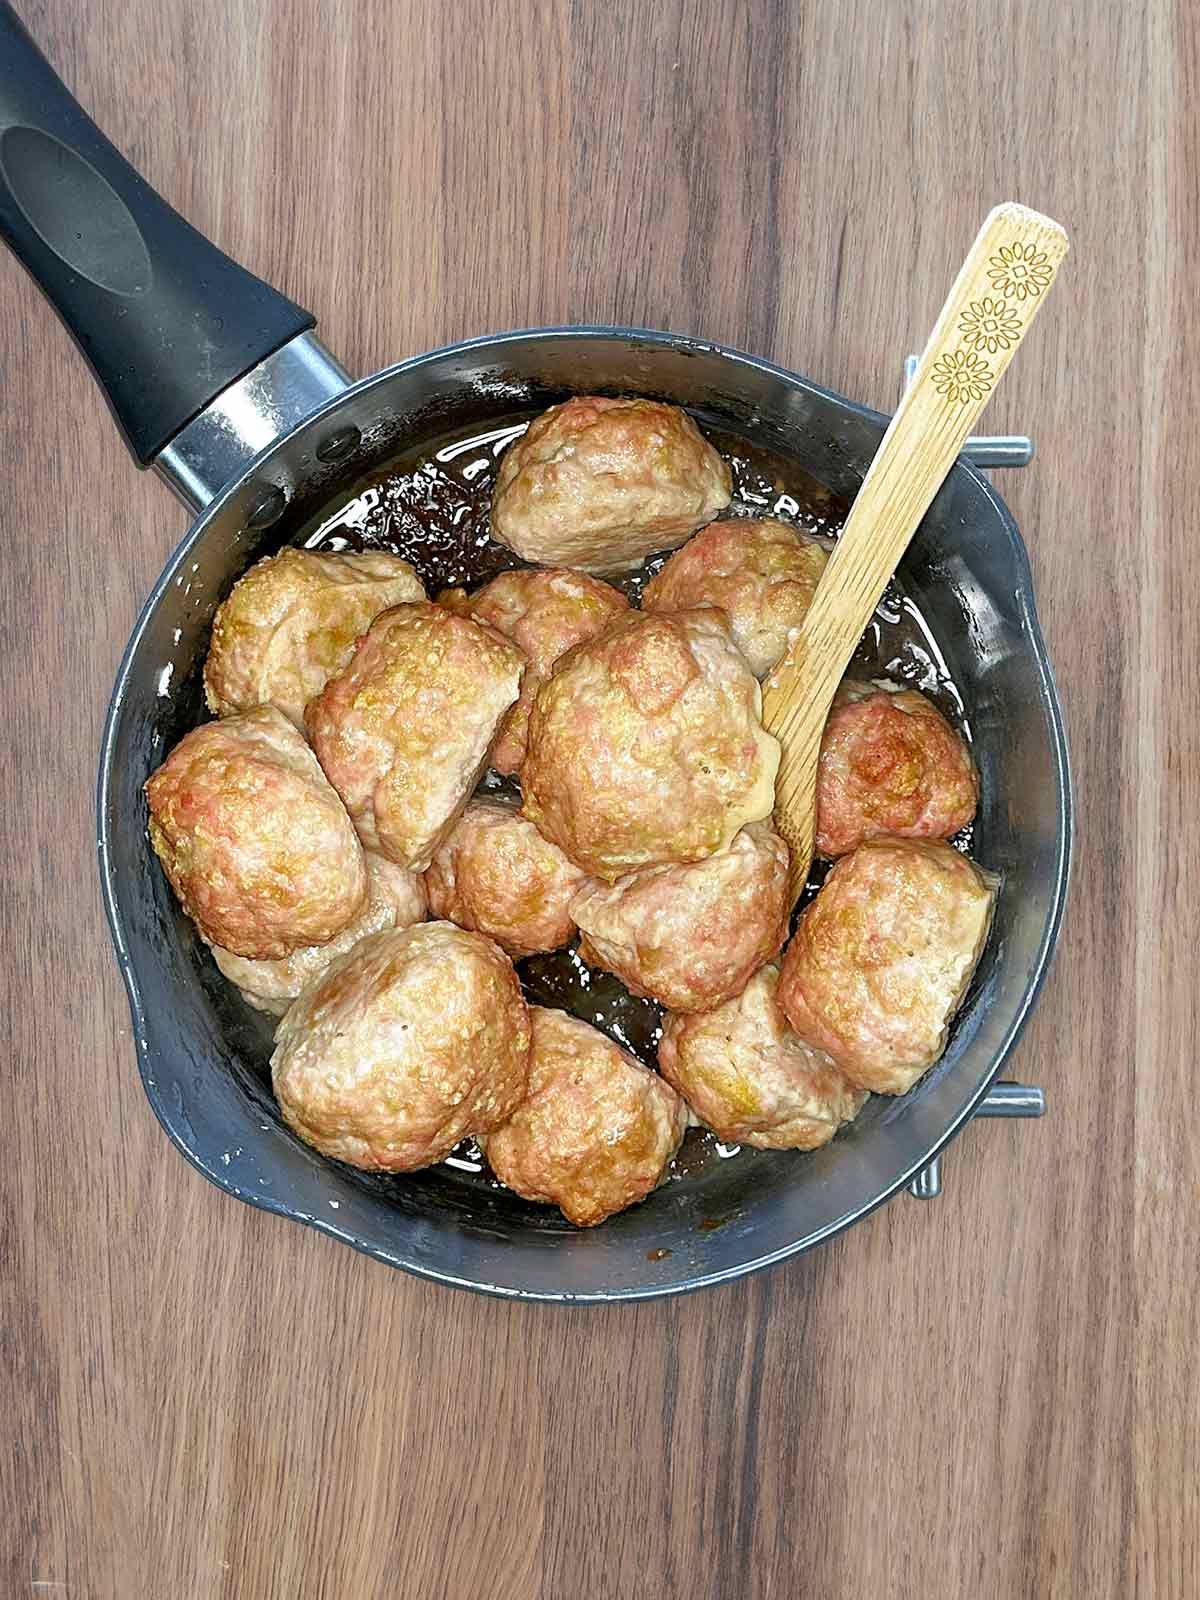 Cooked meatballs in the pan of sauce.